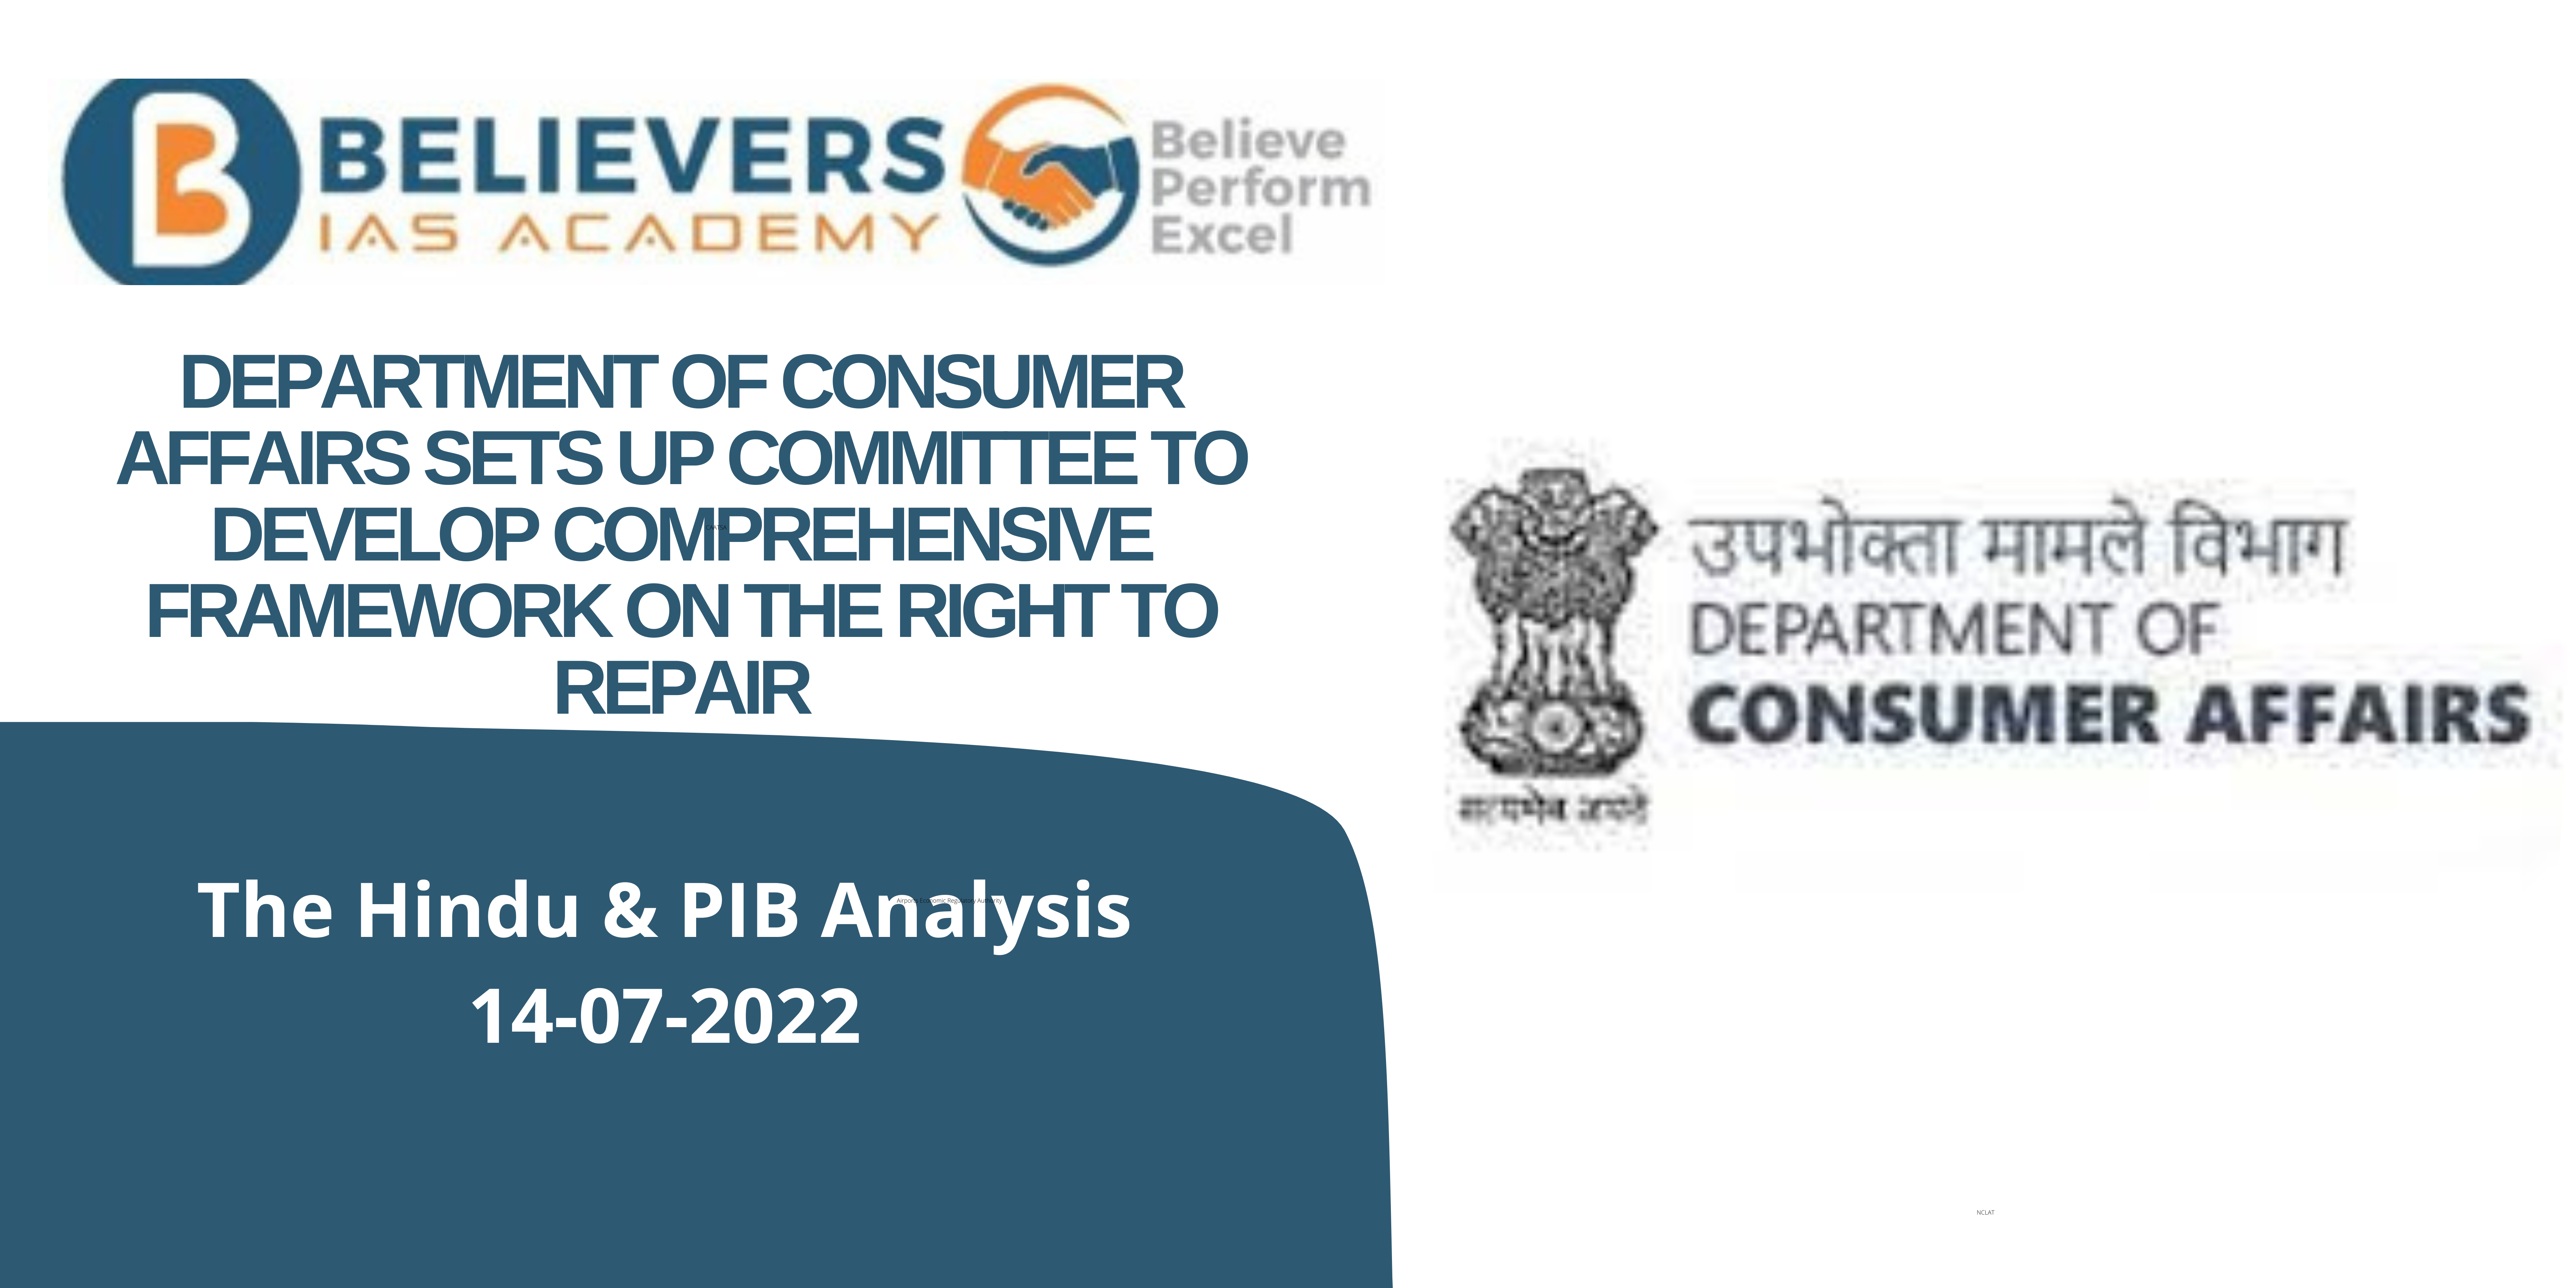 Civil services Current affairs - Department of Consumer Affairs sets up Committee to Develop Comprehensive Framework on the Right to Repair